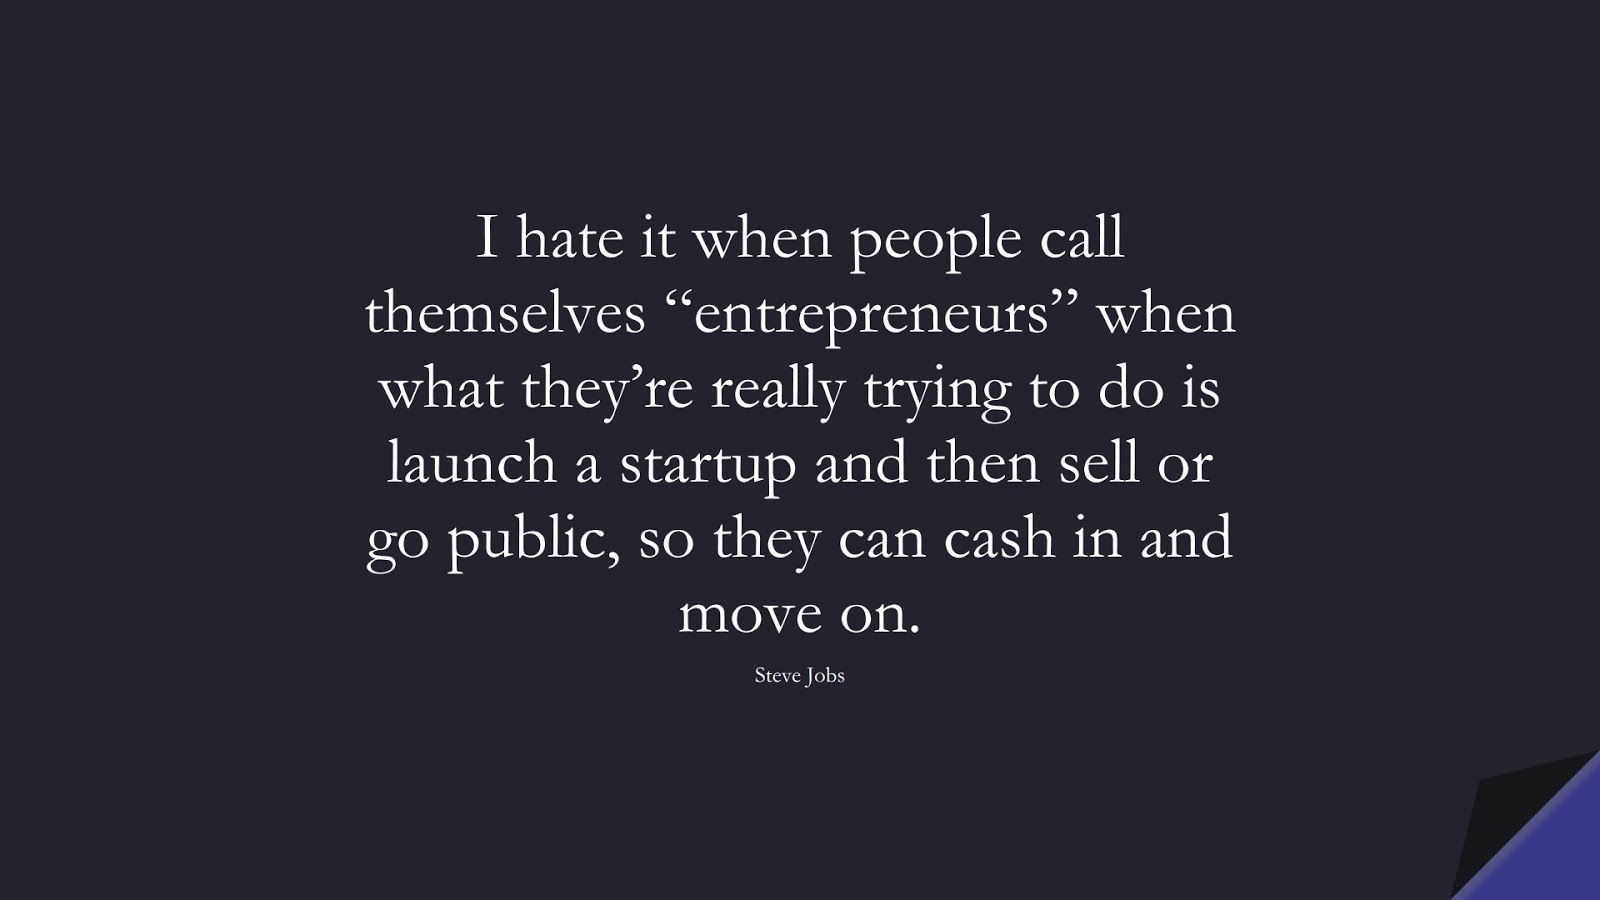 I hate it when people call themselves “entrepreneurs” when what they’re really trying to do is launch a startup and then sell or go public, so they can cash in and move on. (Steve Jobs);  #SteveJobsQuotes